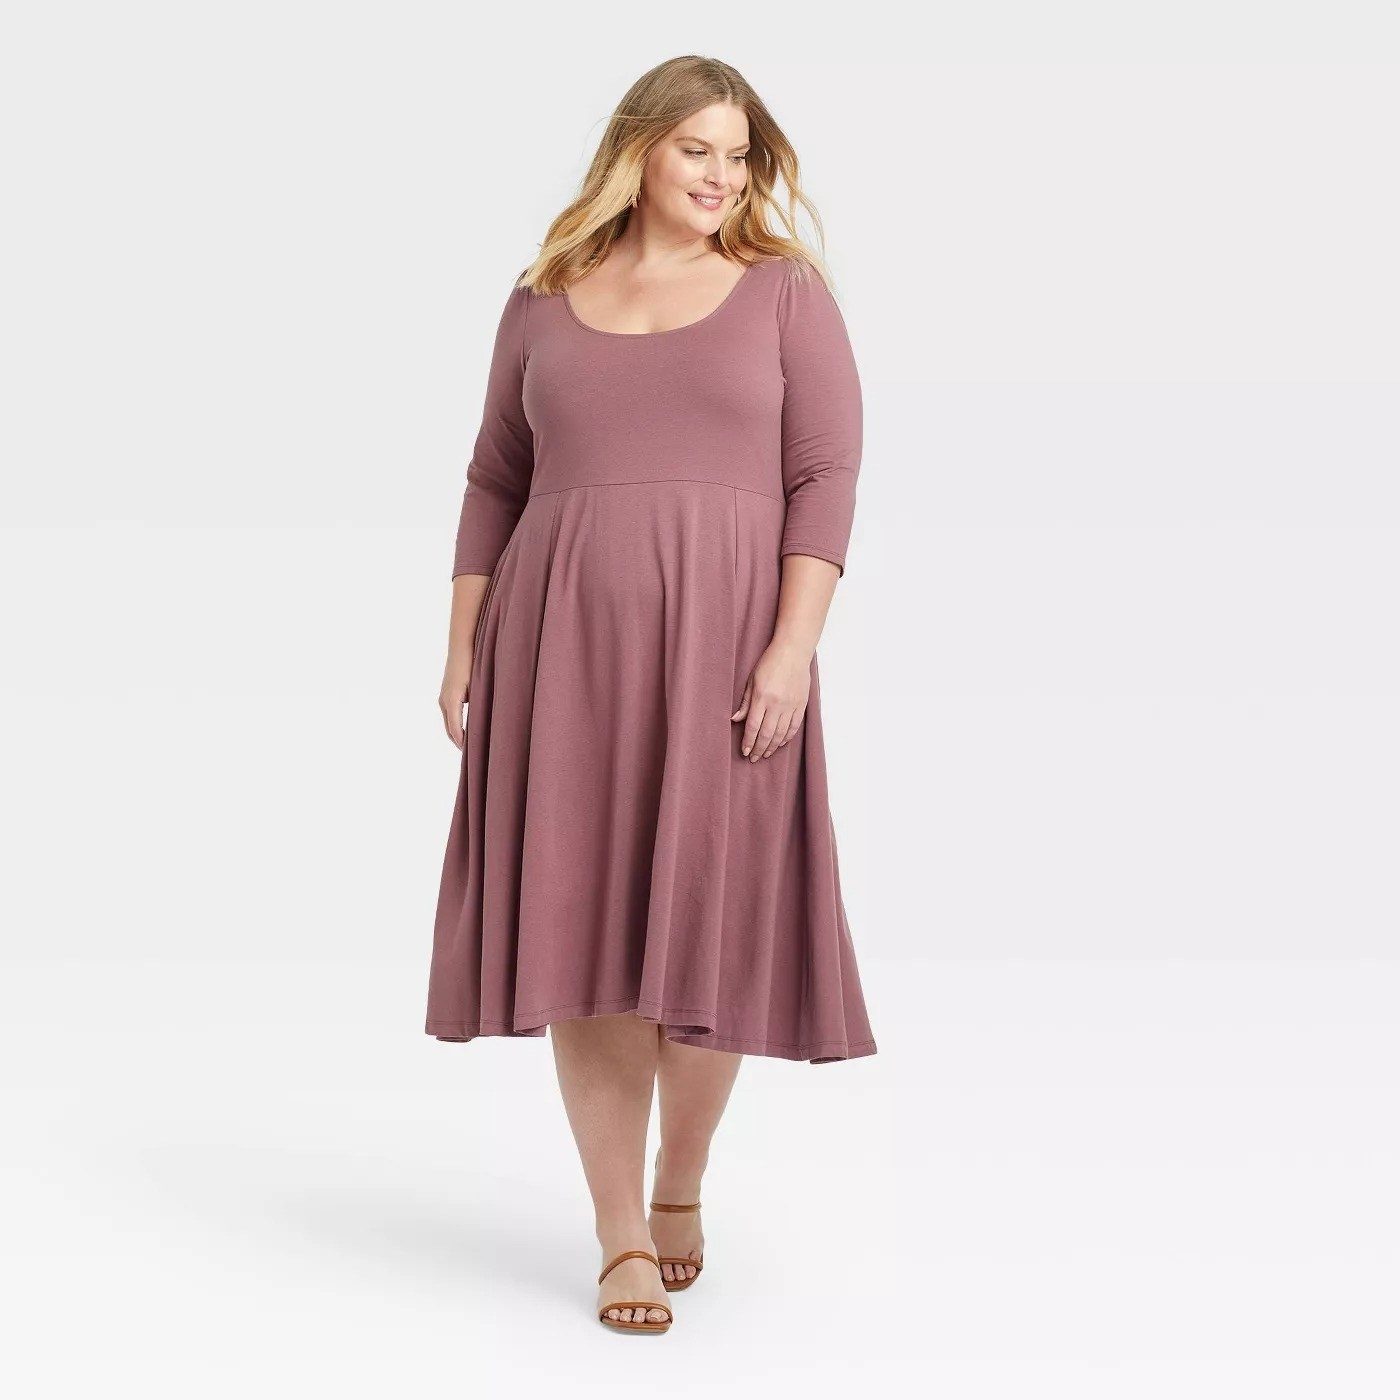 Model wearing mauve midi dress with round neck, goes past the knee